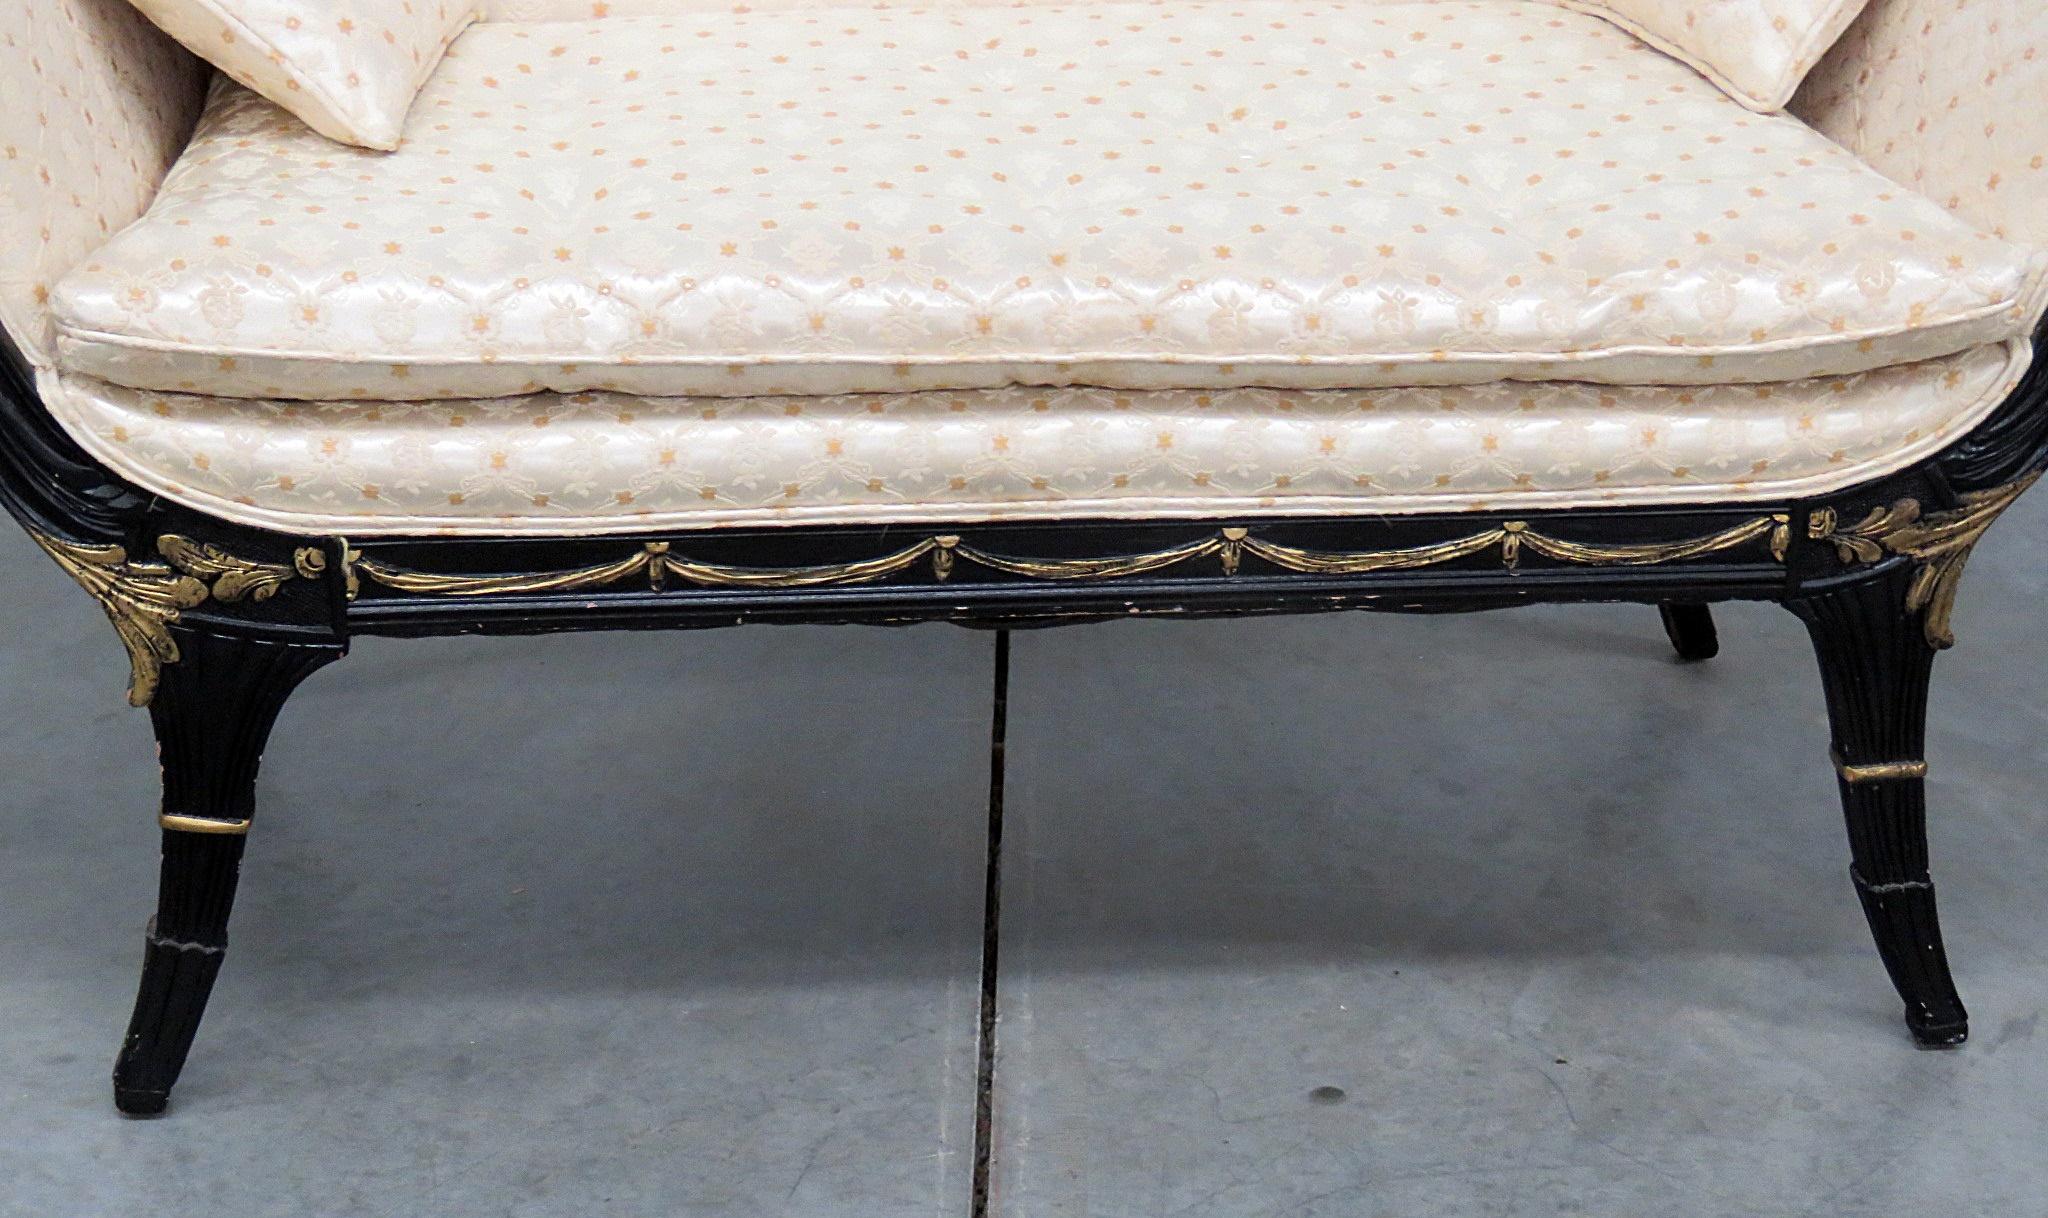 Regency style ebonized settee with textured upholstery, distressed gilt accents, and 2 matching accent pillows.